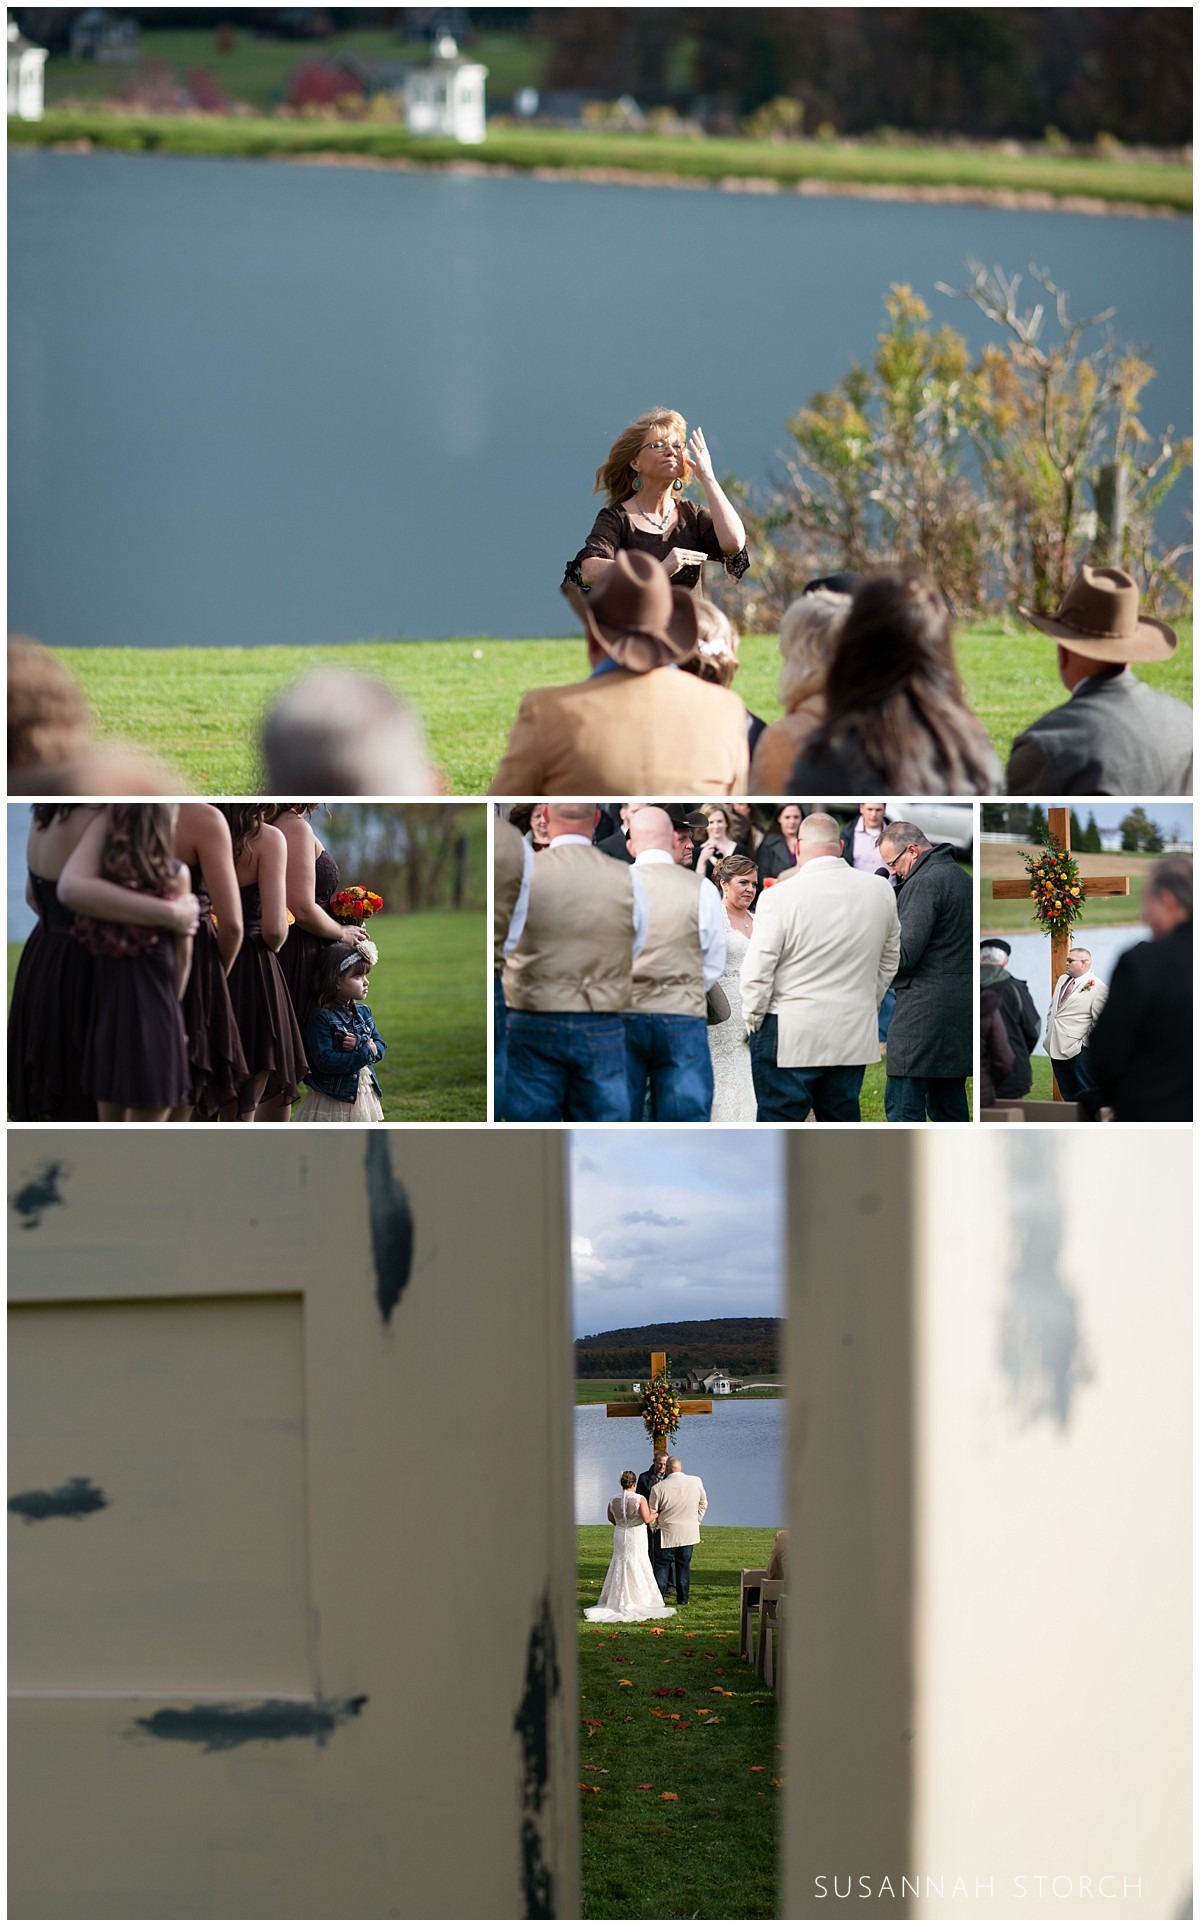 images of an outdoor wedding ceremony